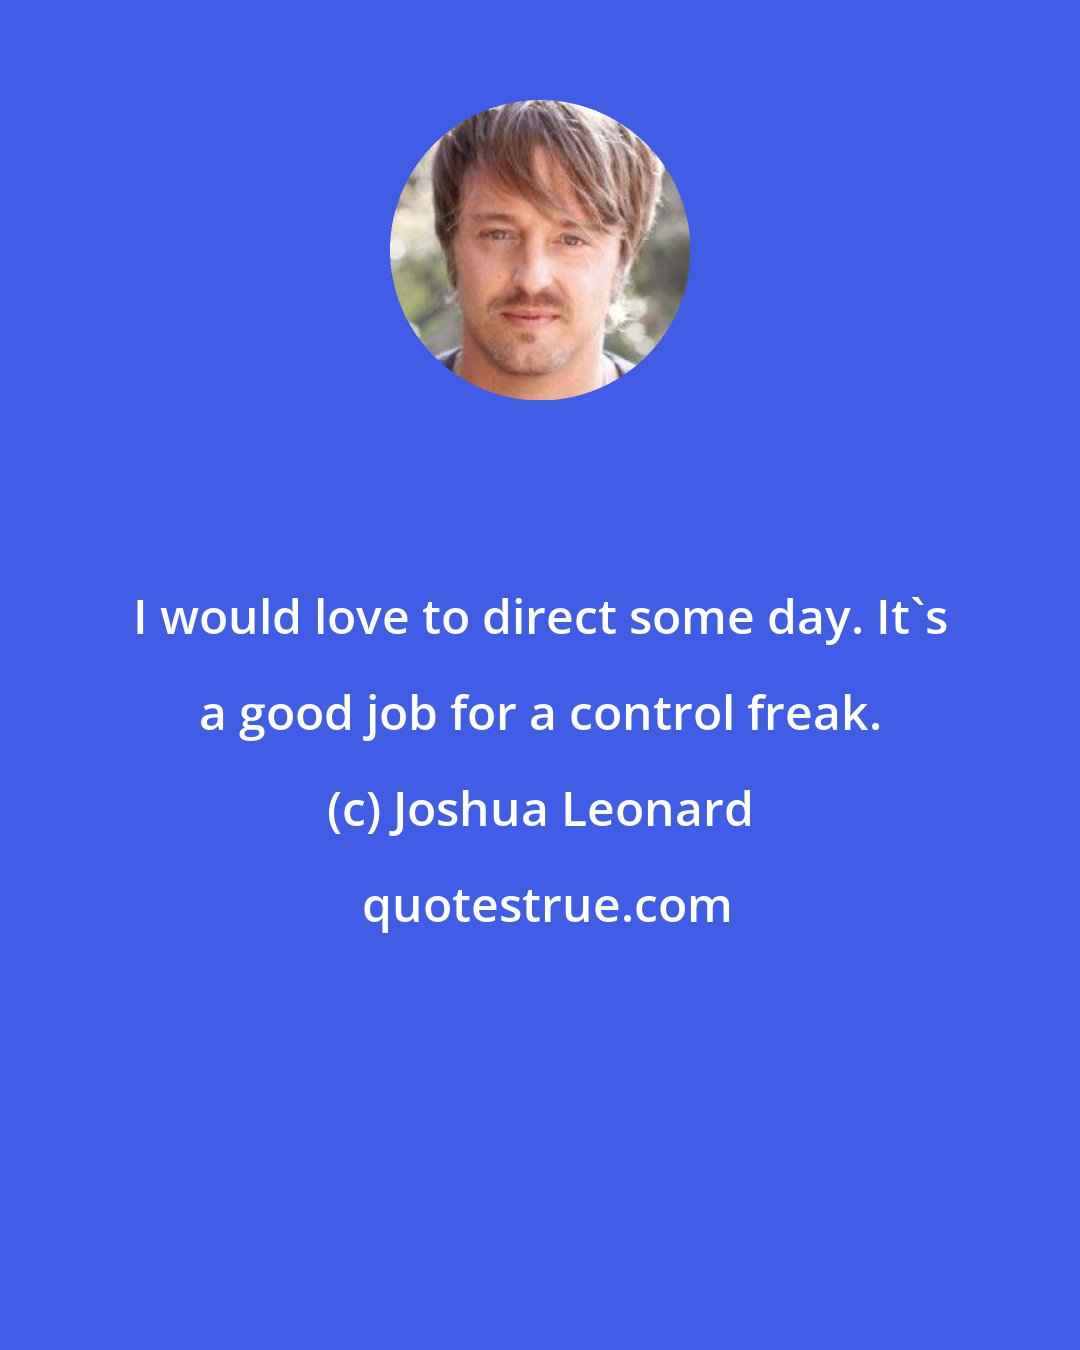 Joshua Leonard: I would love to direct some day. It's a good job for a control freak.